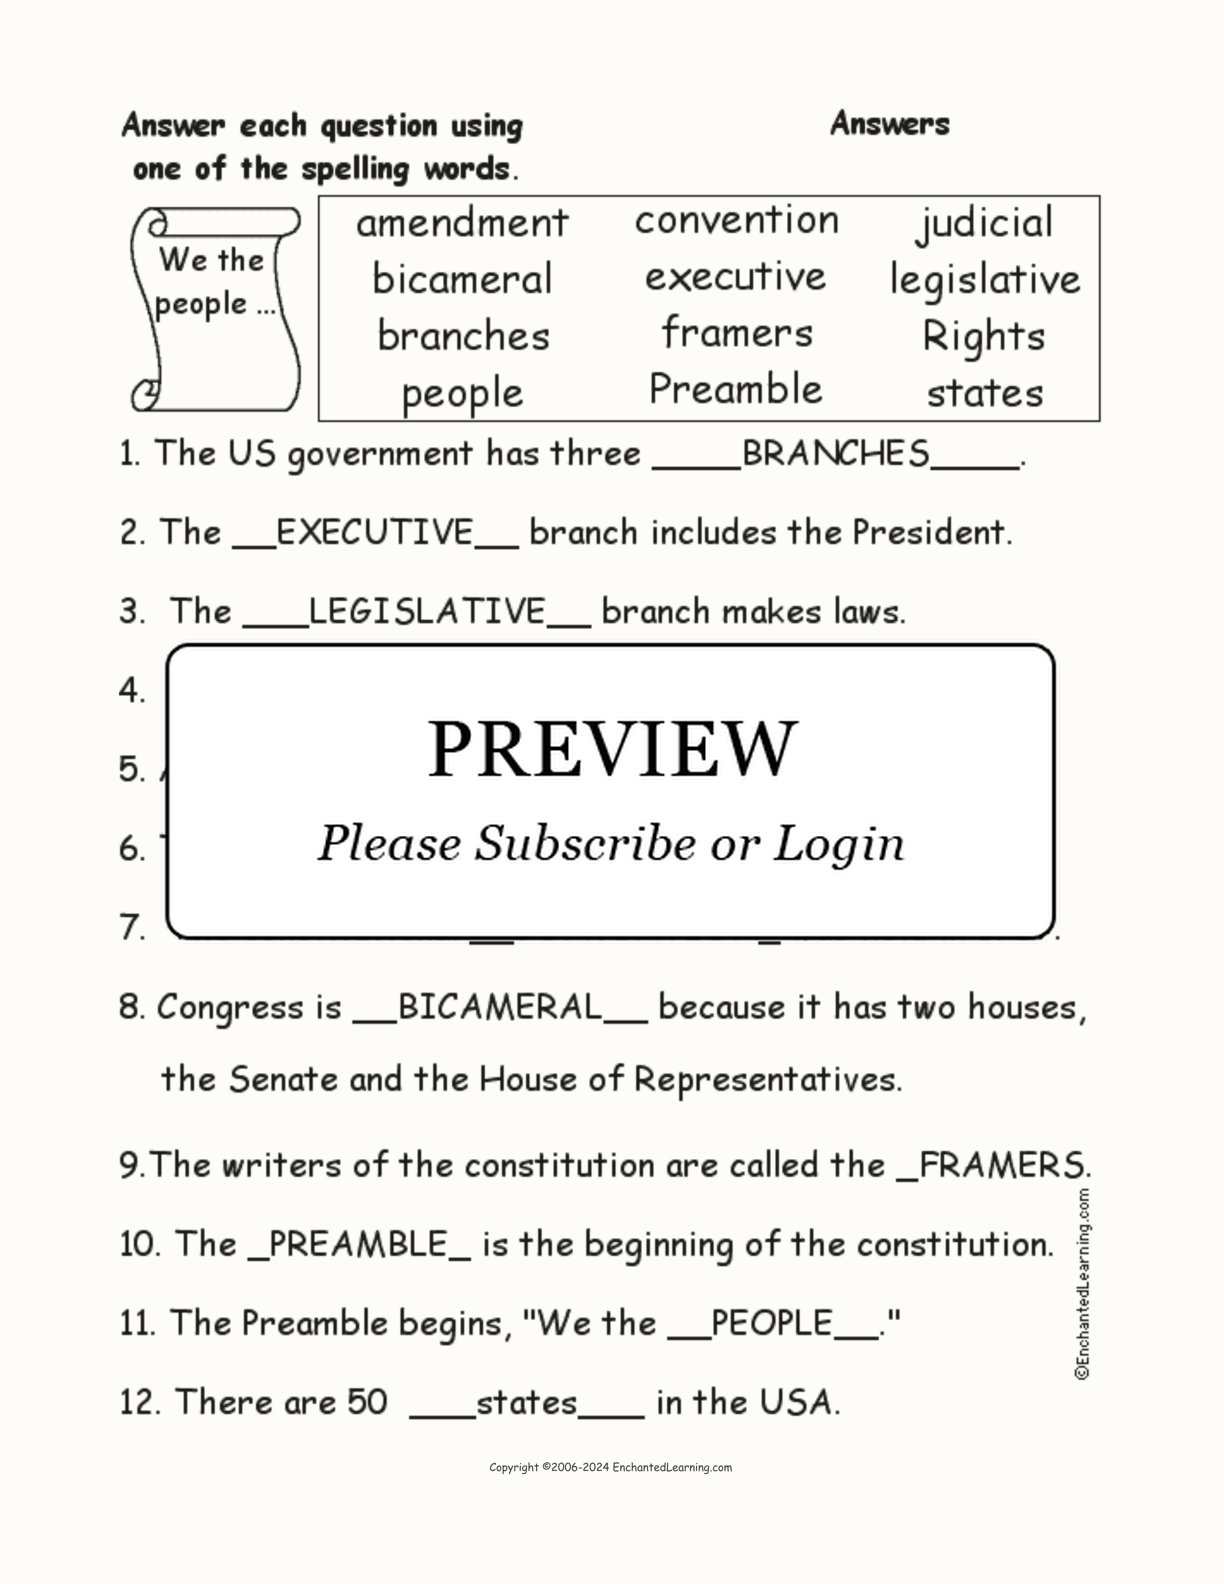 Constitution Spelling Word Questions interactive worksheet page 2